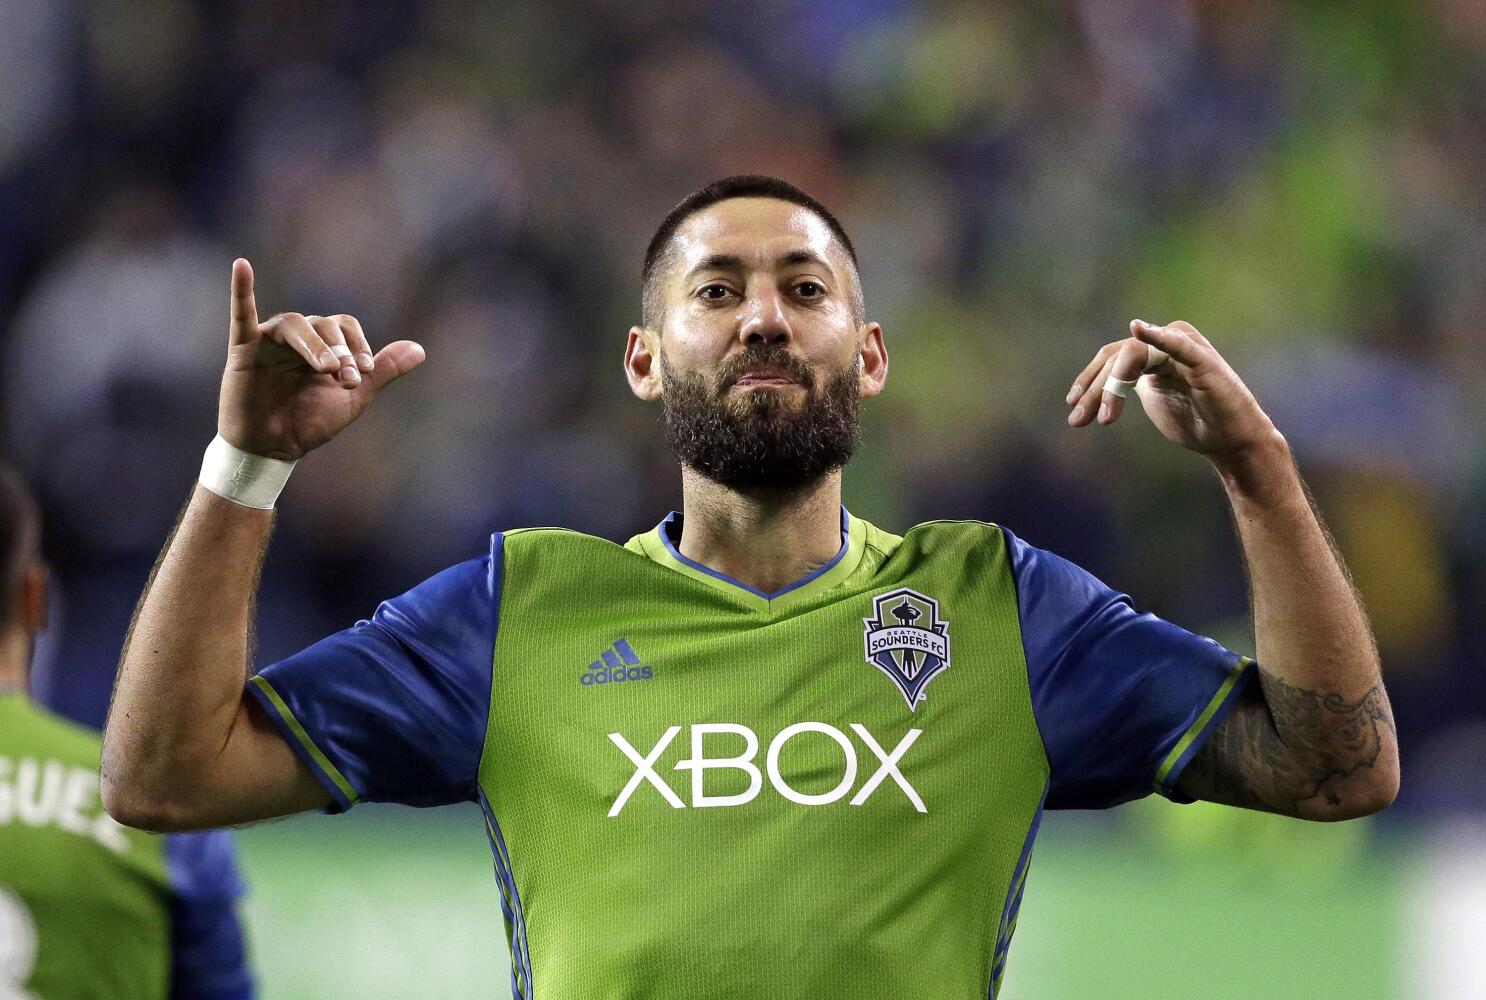 Why would Clint Dempsey move from Spurs to the Seattle Sounders